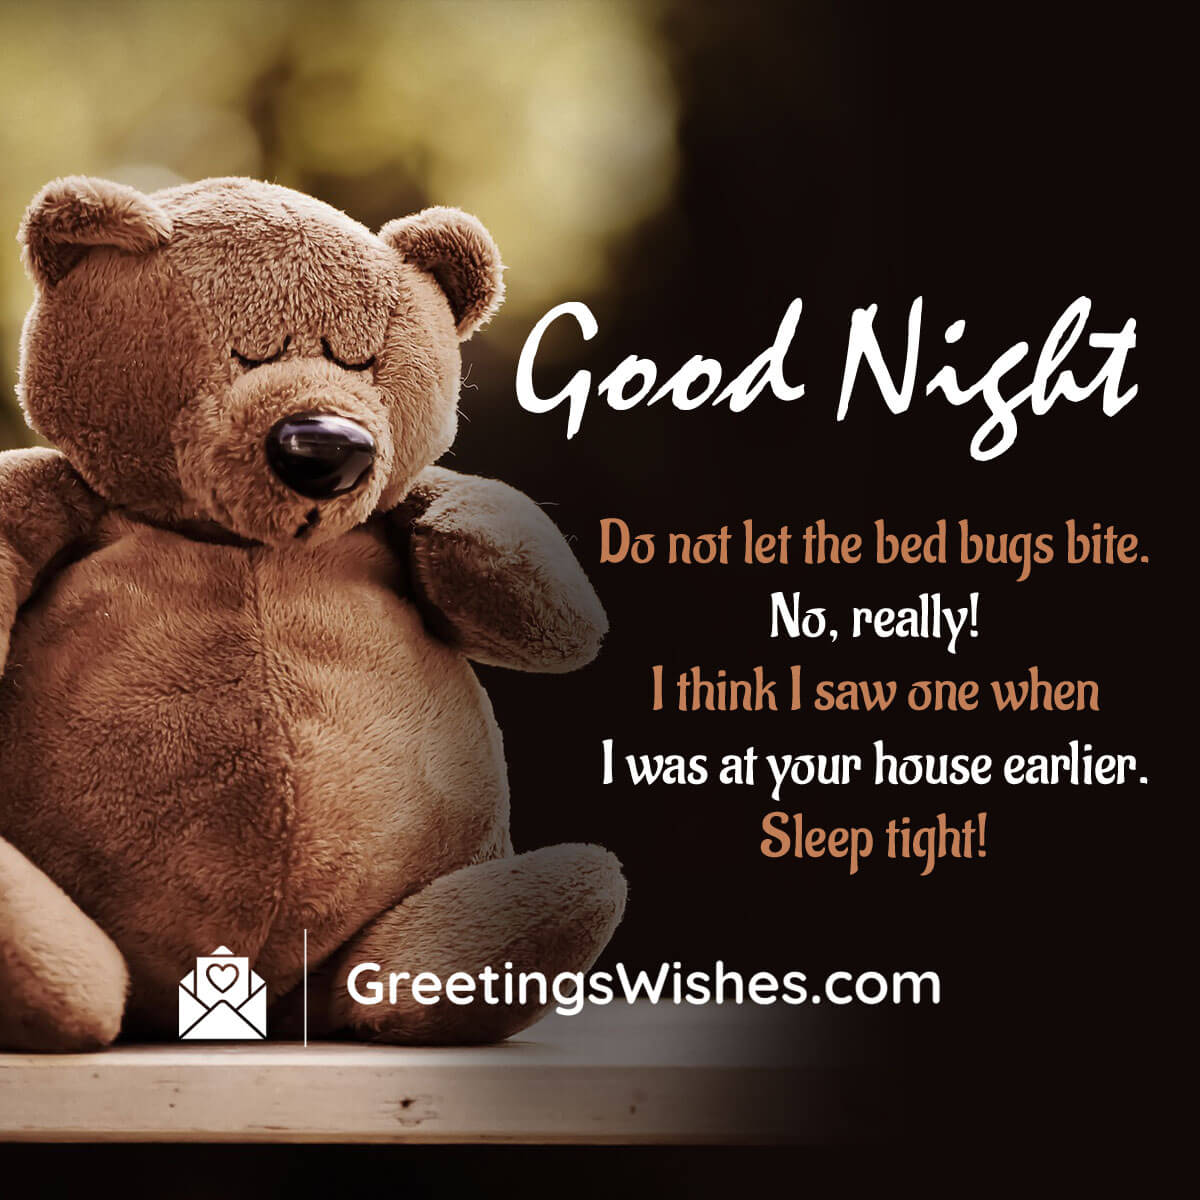 Funny Good Night Wishes - Greetings Wishes